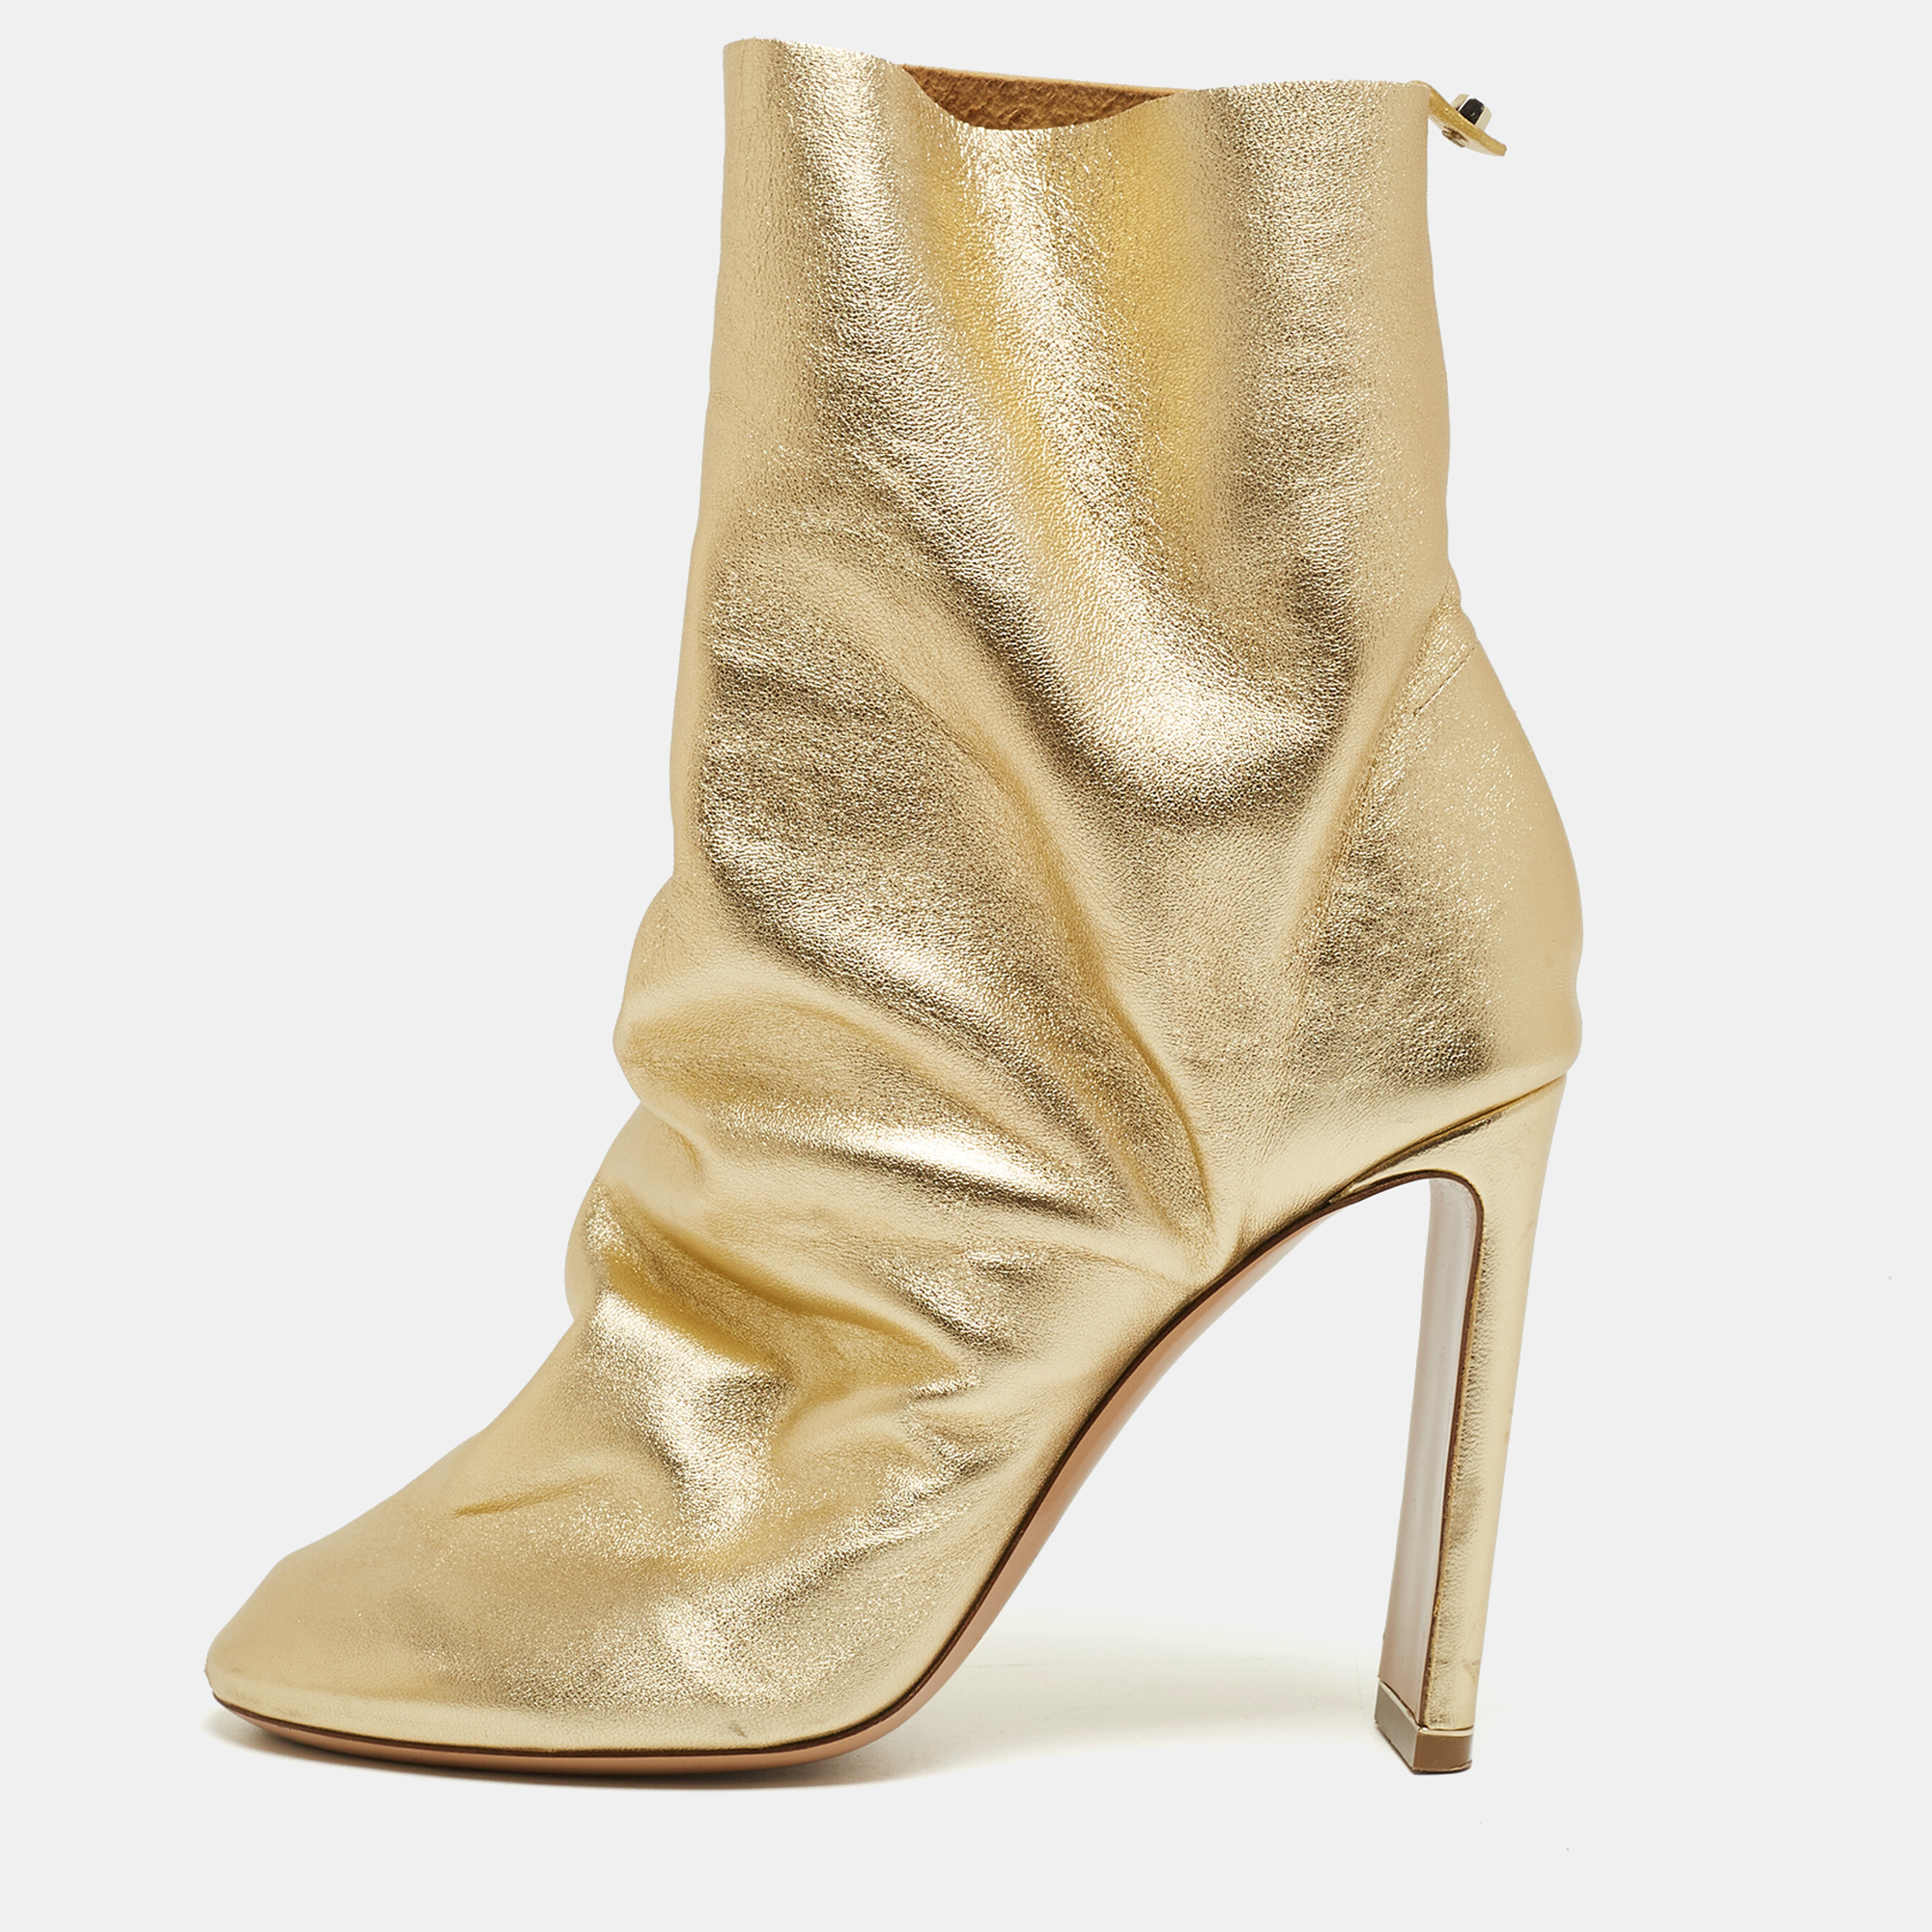 Pre-owned Nicholas Kirkwood Metallic Gold Foil Leather D'arcy Ruched Ankle Booties Size 38.5